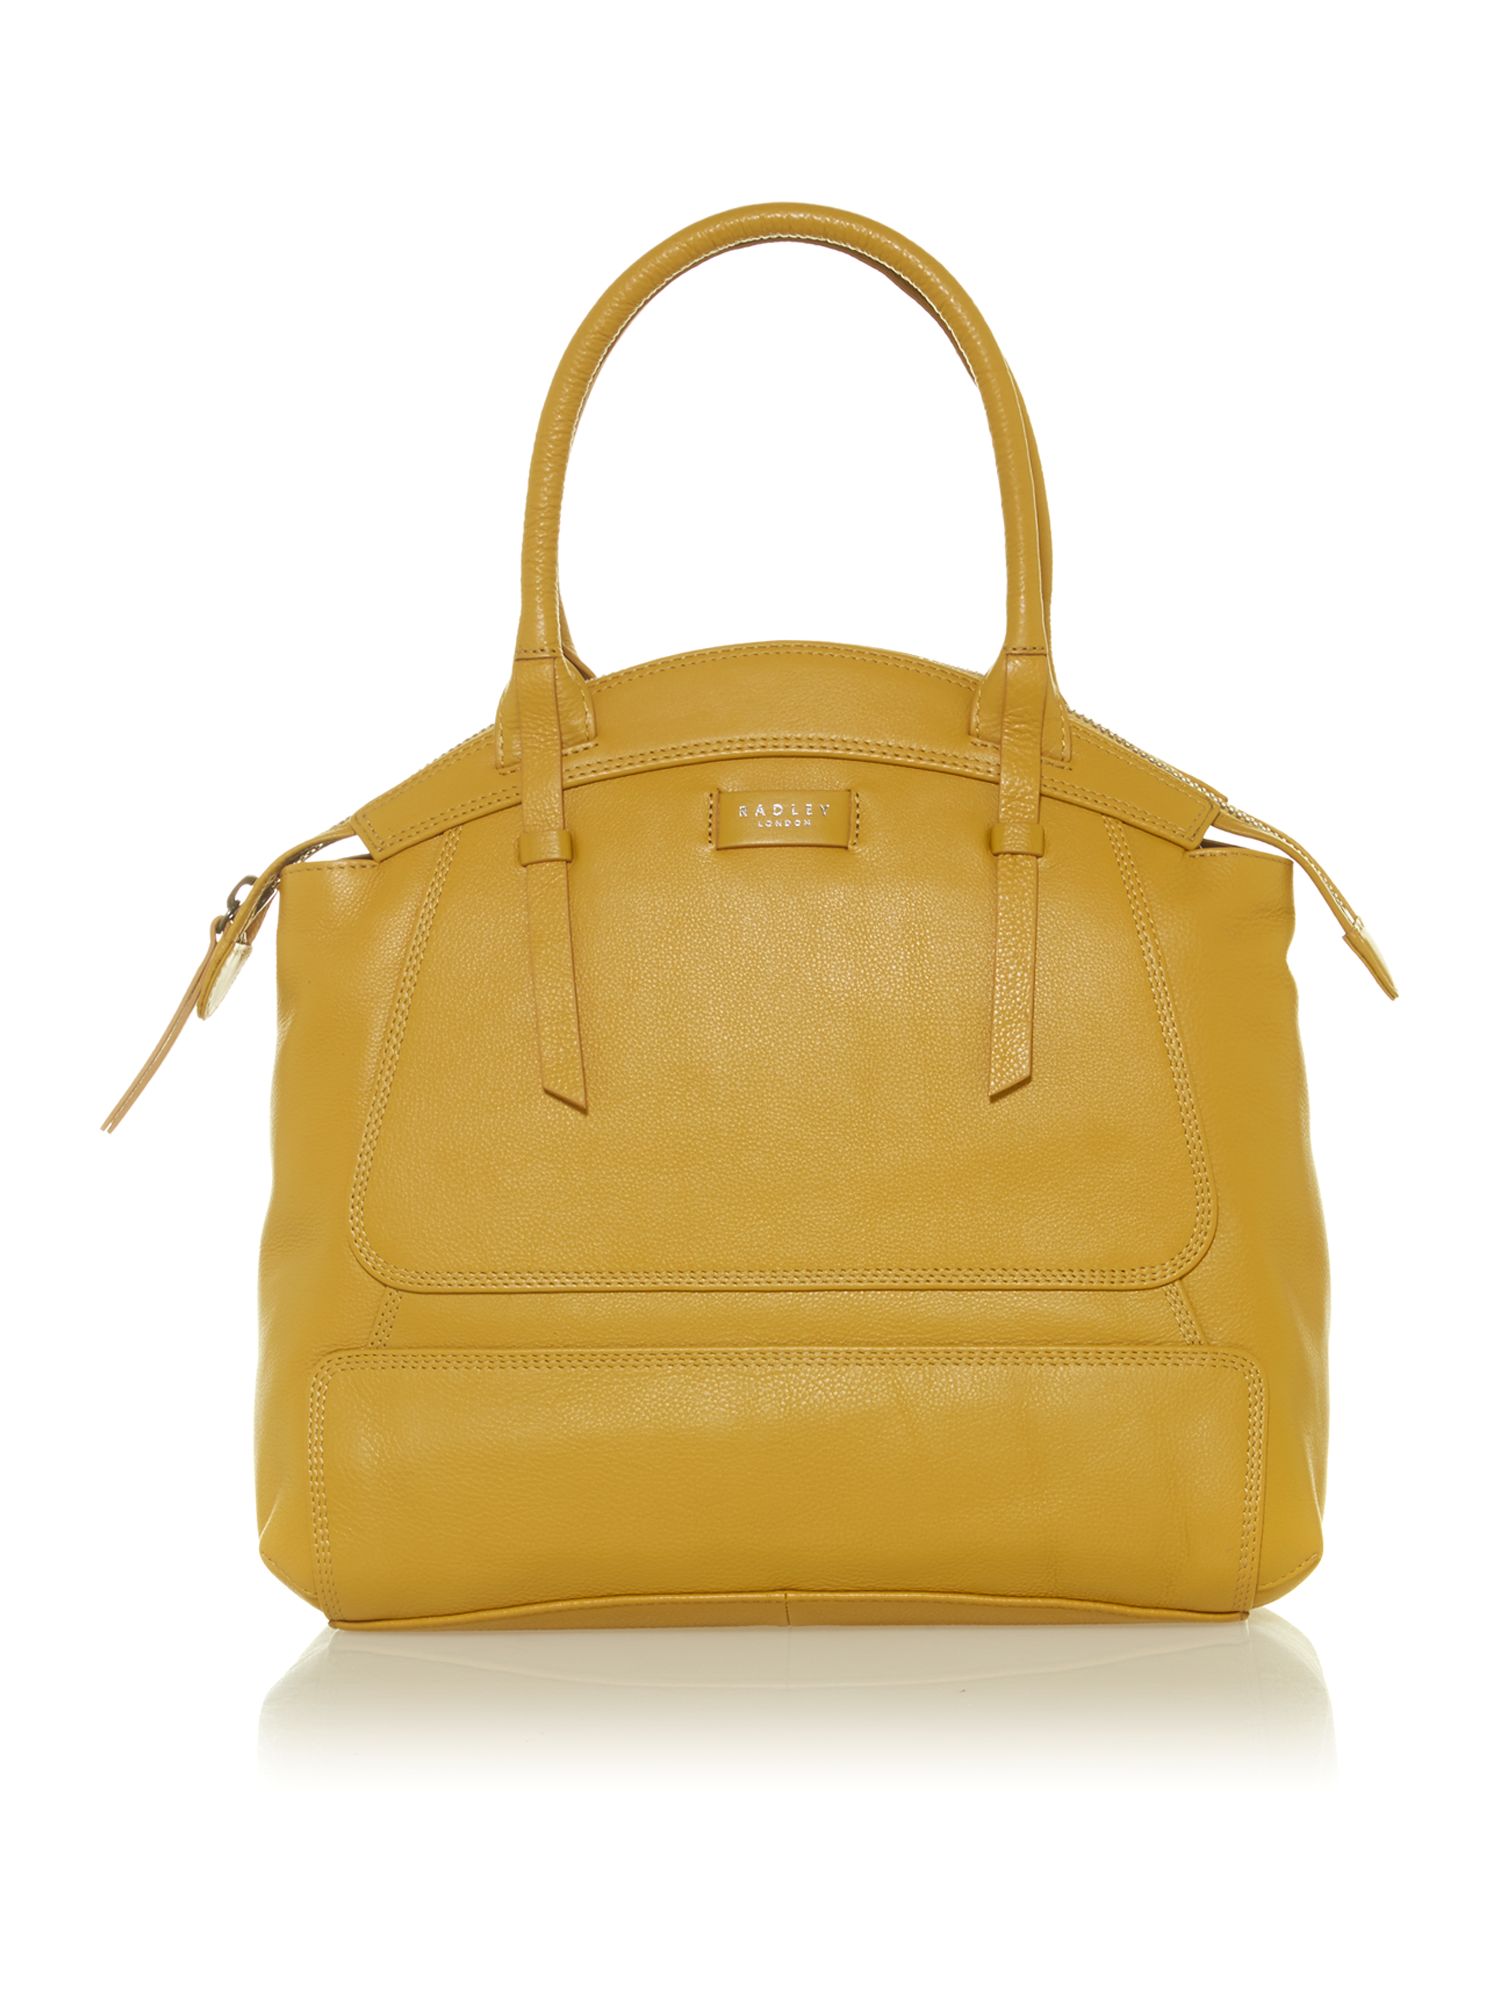 Radley Yellow Large Dome Bag in Yellow | Lyst